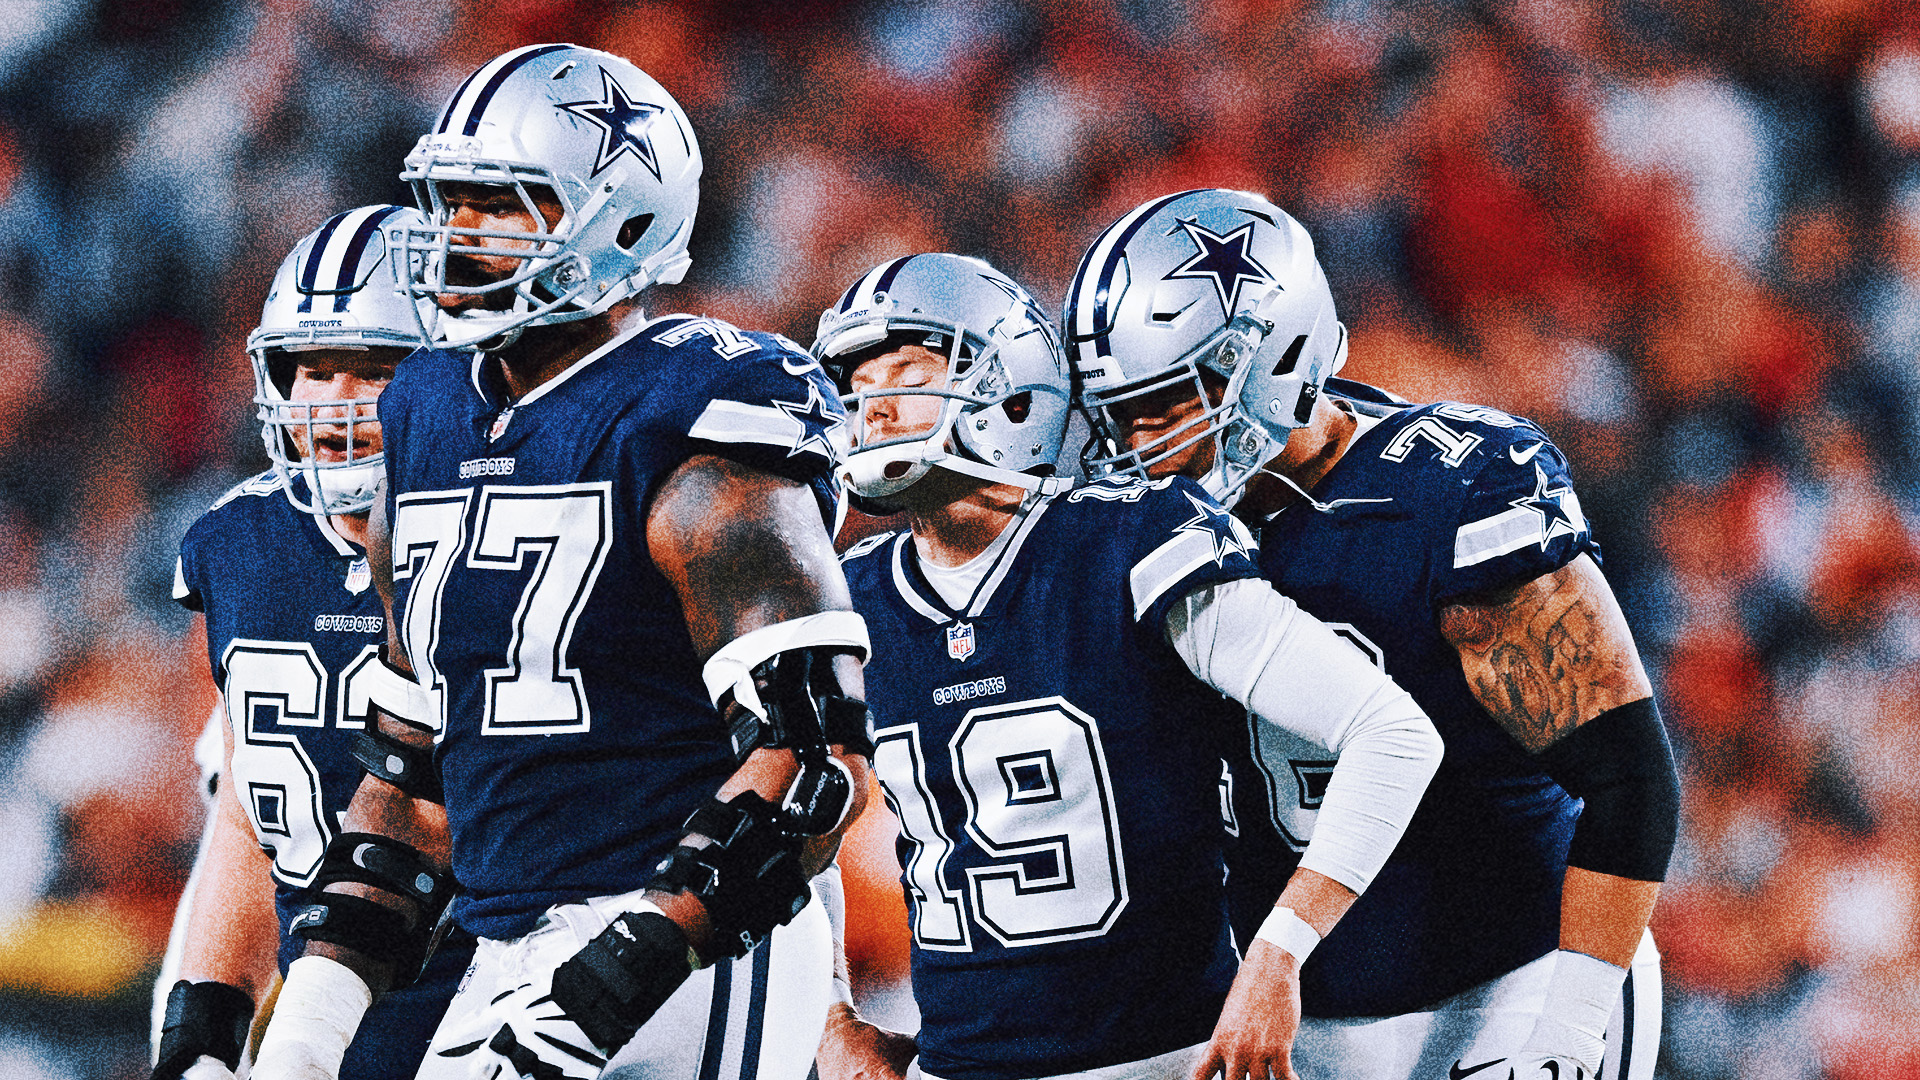 Dallas Cowboys vs. Tampa Bay Buccaneers: How to watch NFL Wild